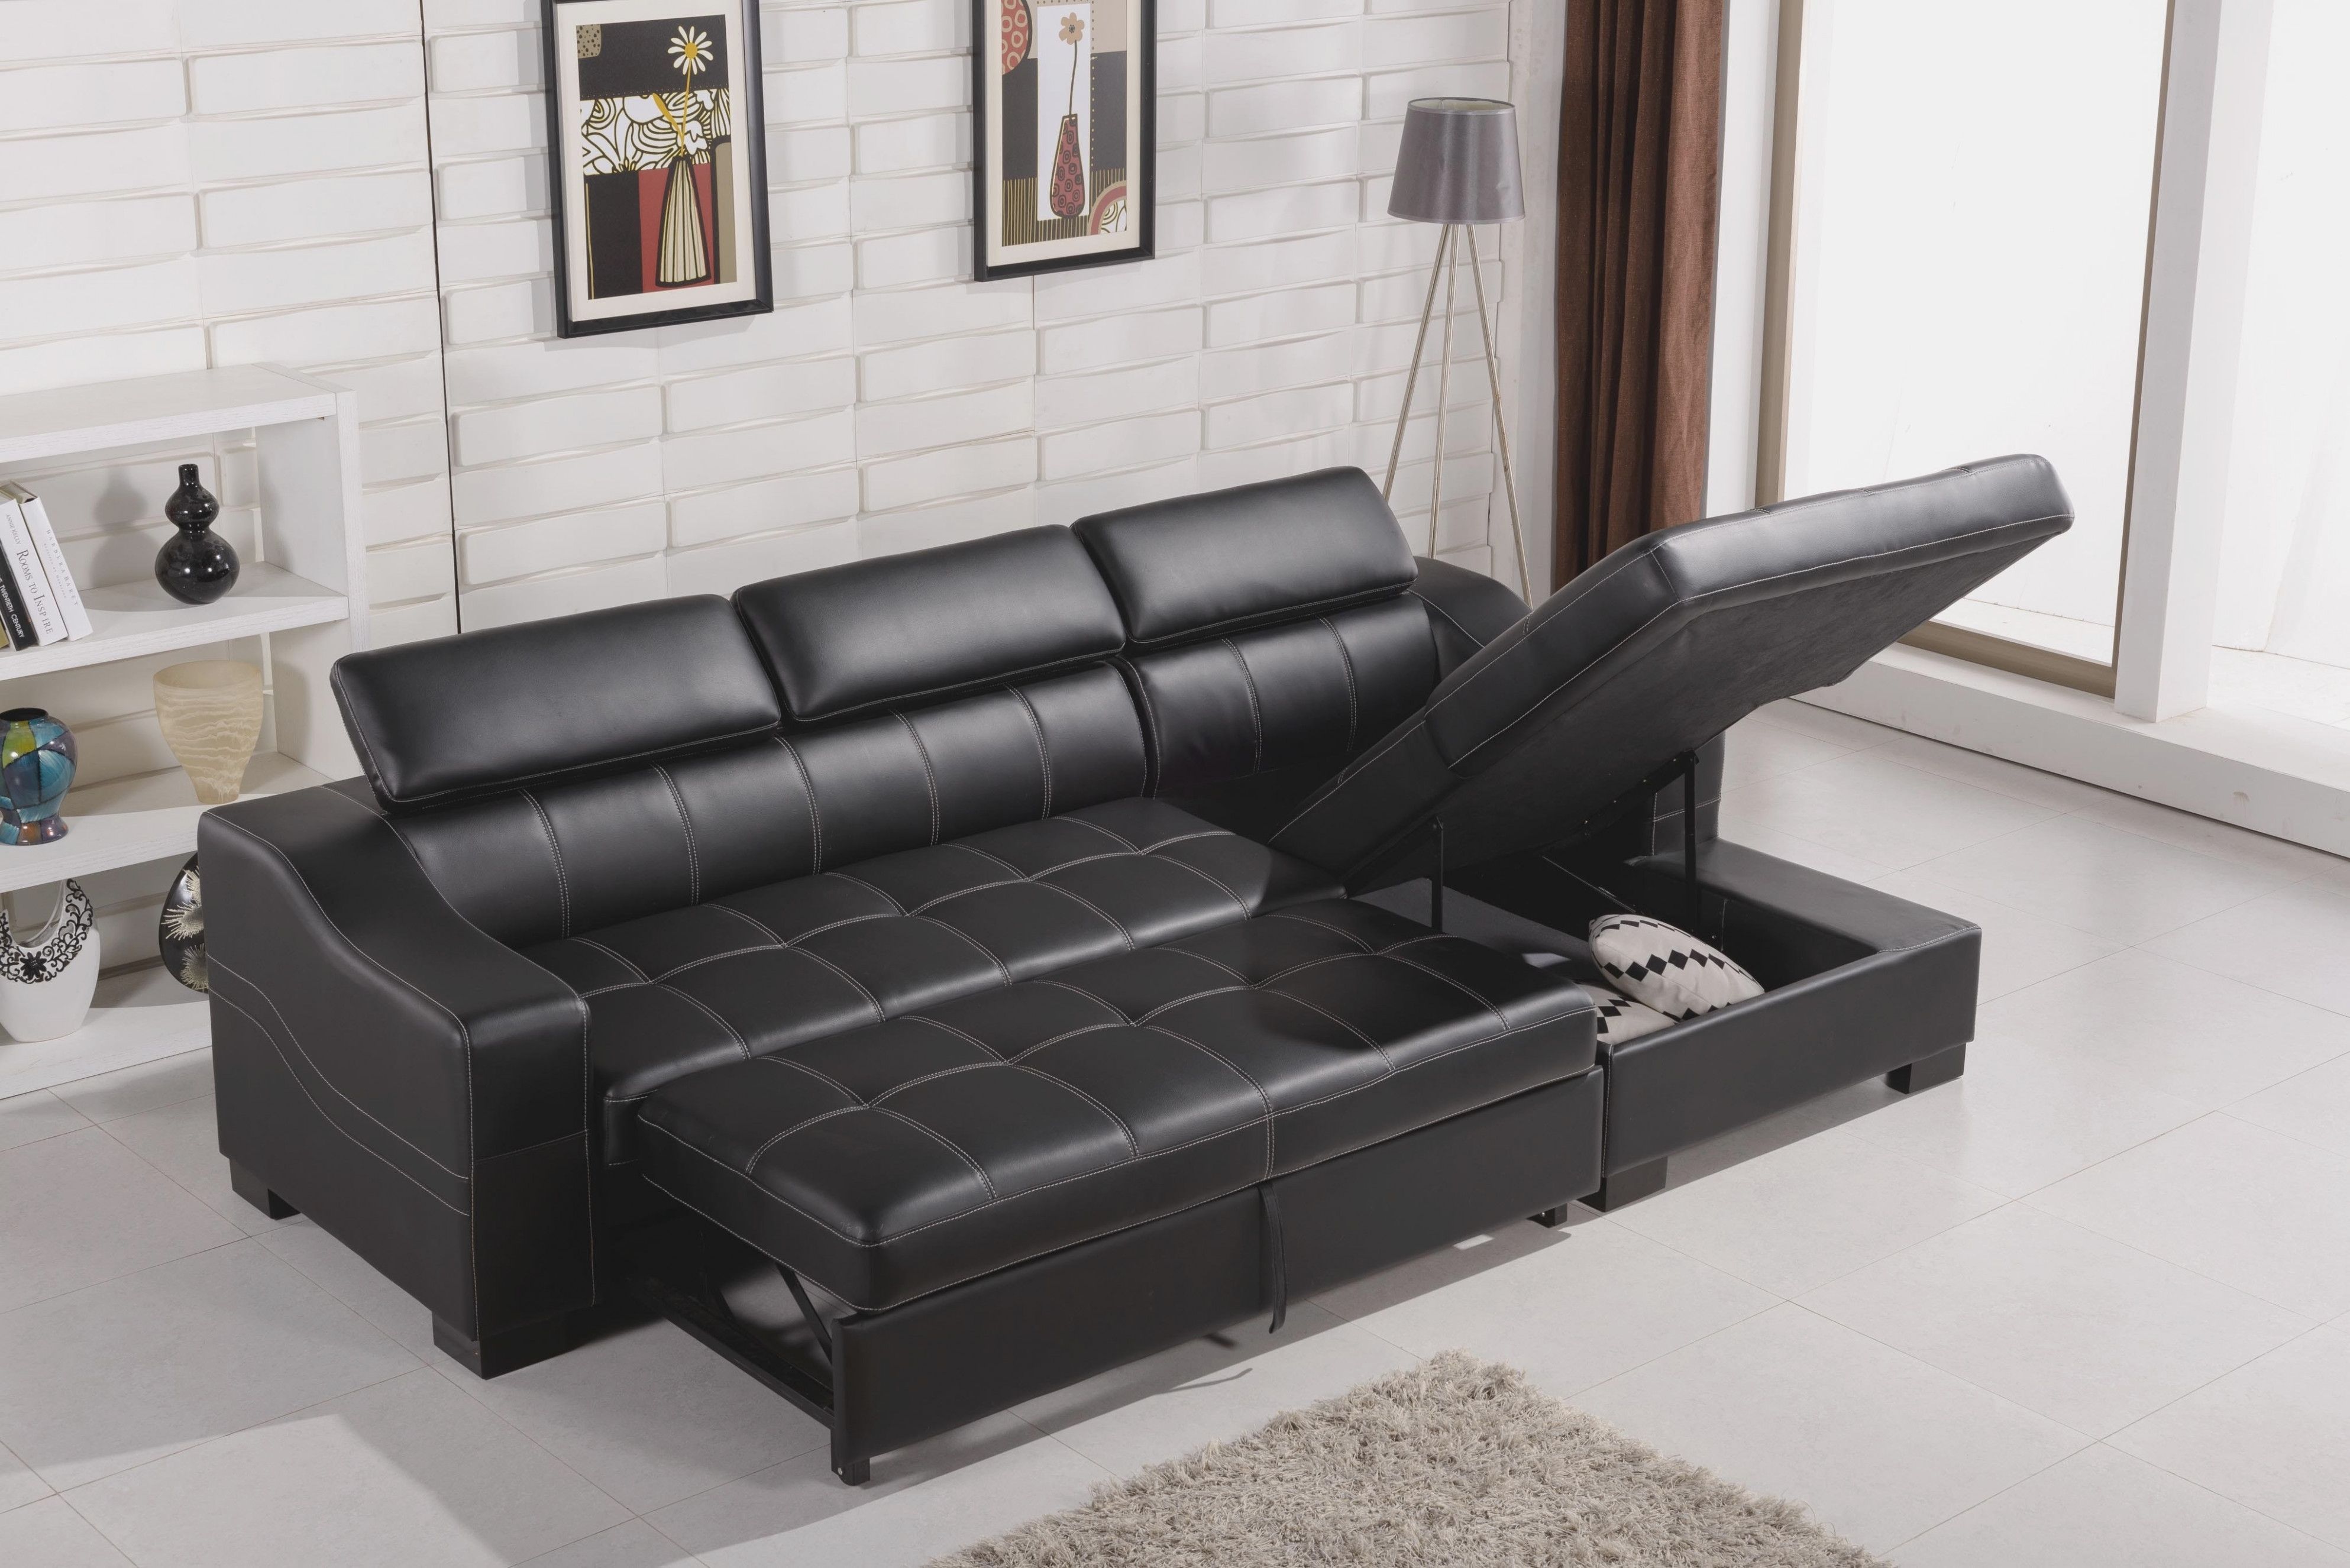 Formidable Sectional Sofa With Storage Chaise With Additional Chaise Regarding Taren Reversible Sofa/chaise Sleeper Sectionals With Storage Ottoman (View 2 of 30)